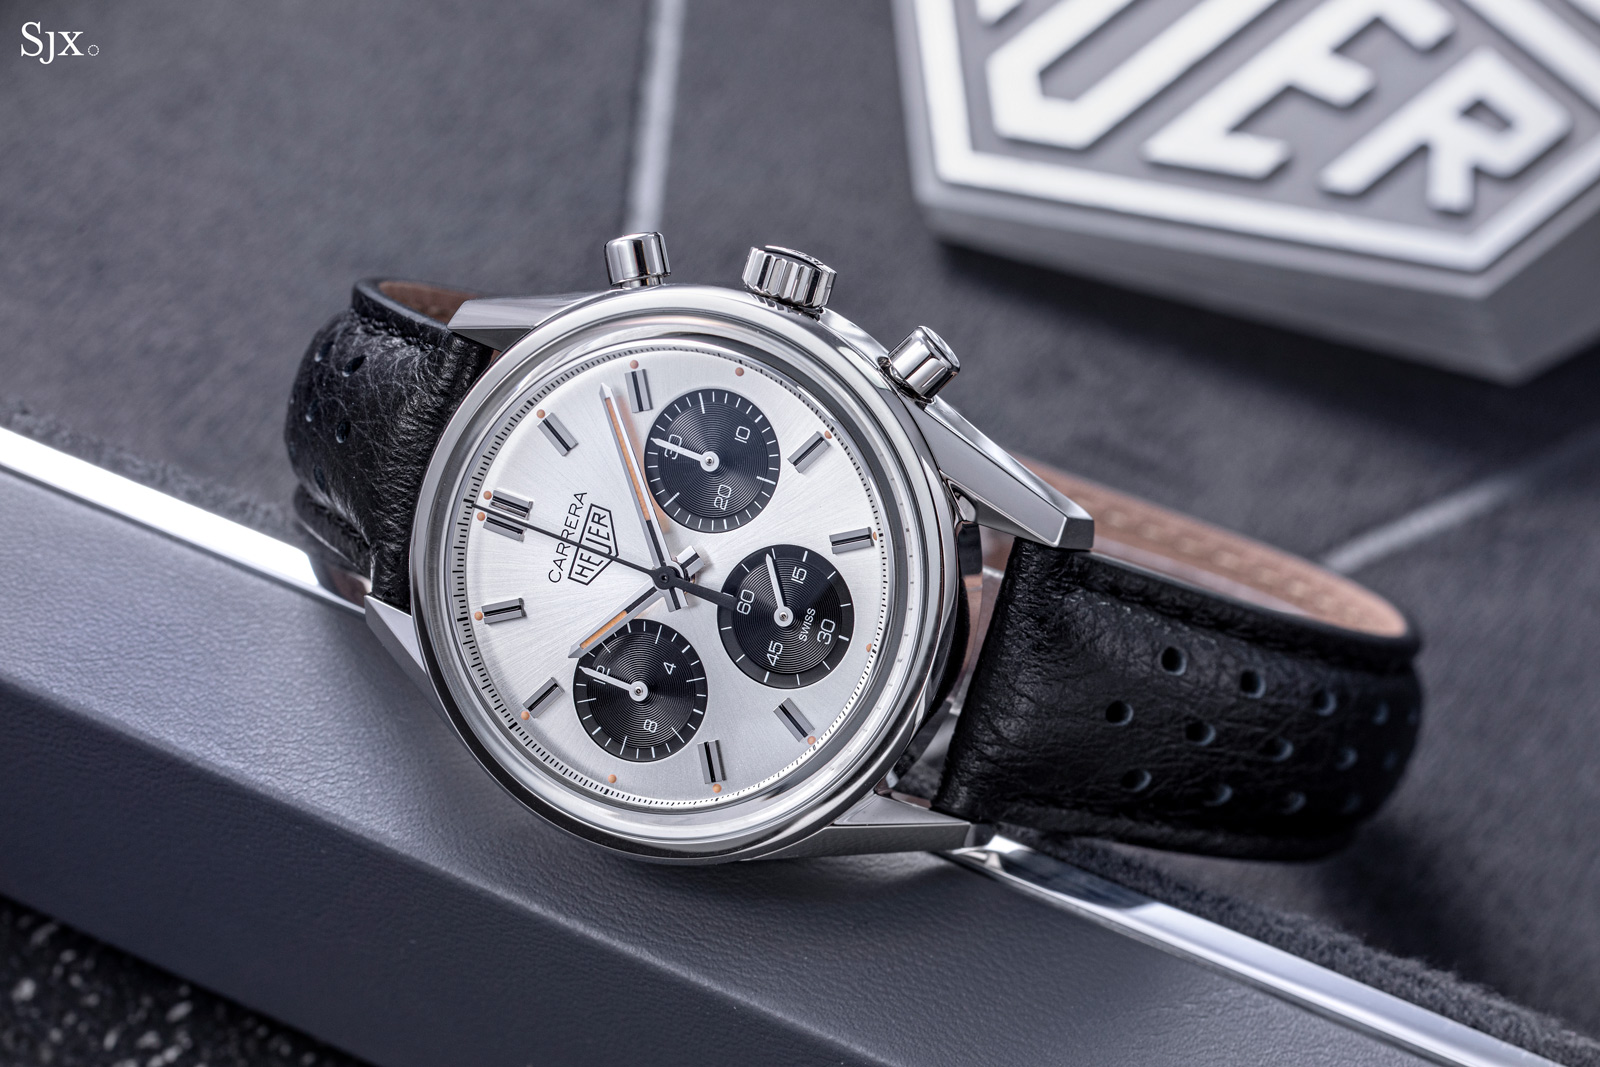 Tag Heuer Carrera 60th Anniversary Hands-On Review